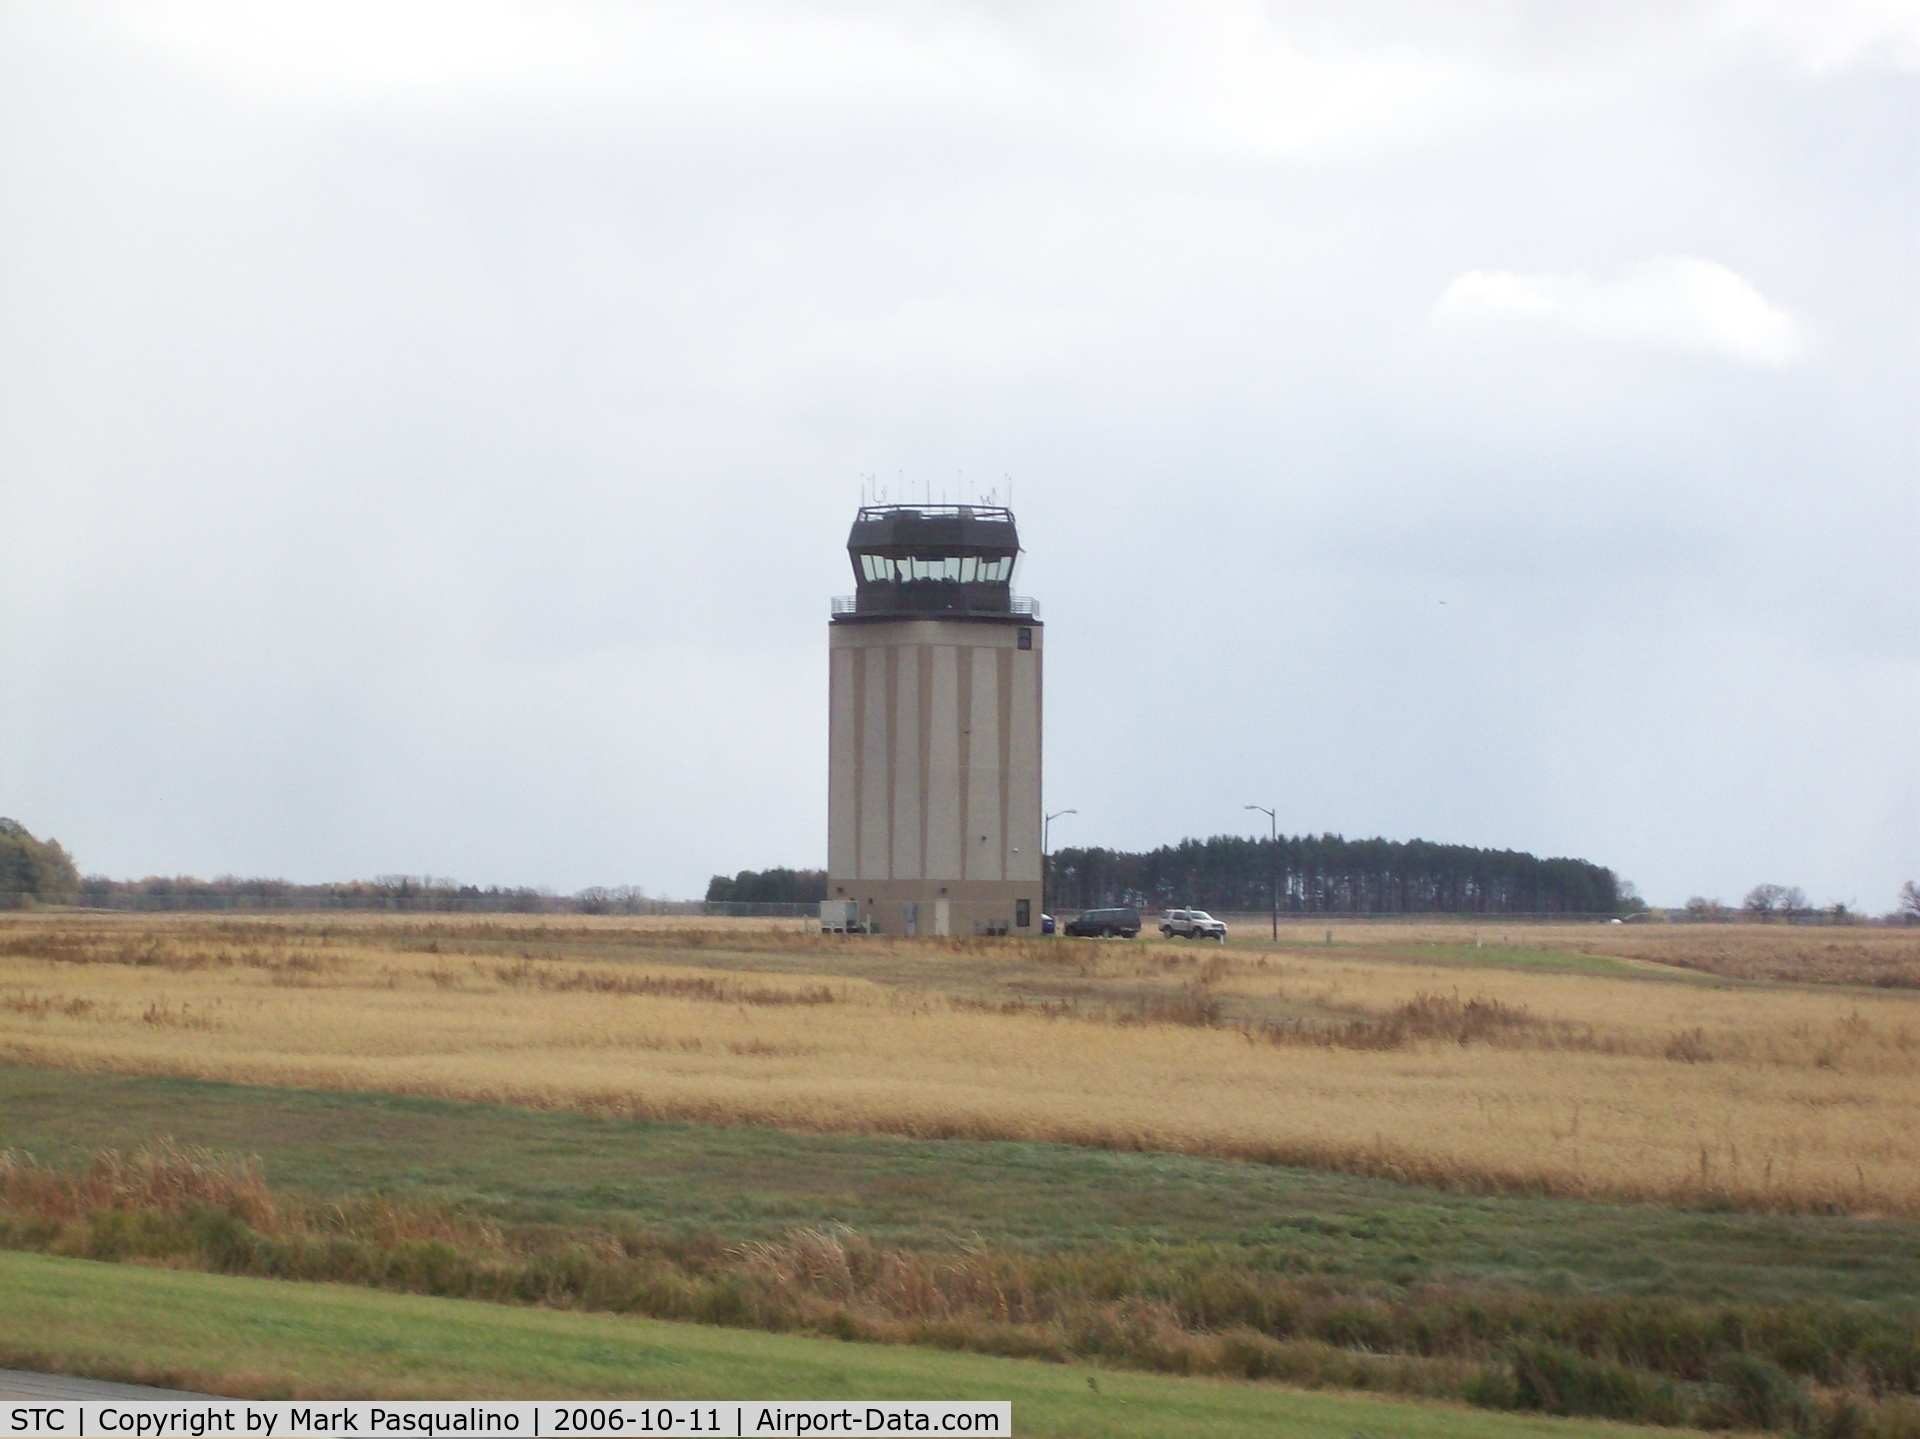 St Cloud Regional Airport (STC) - Control Tower